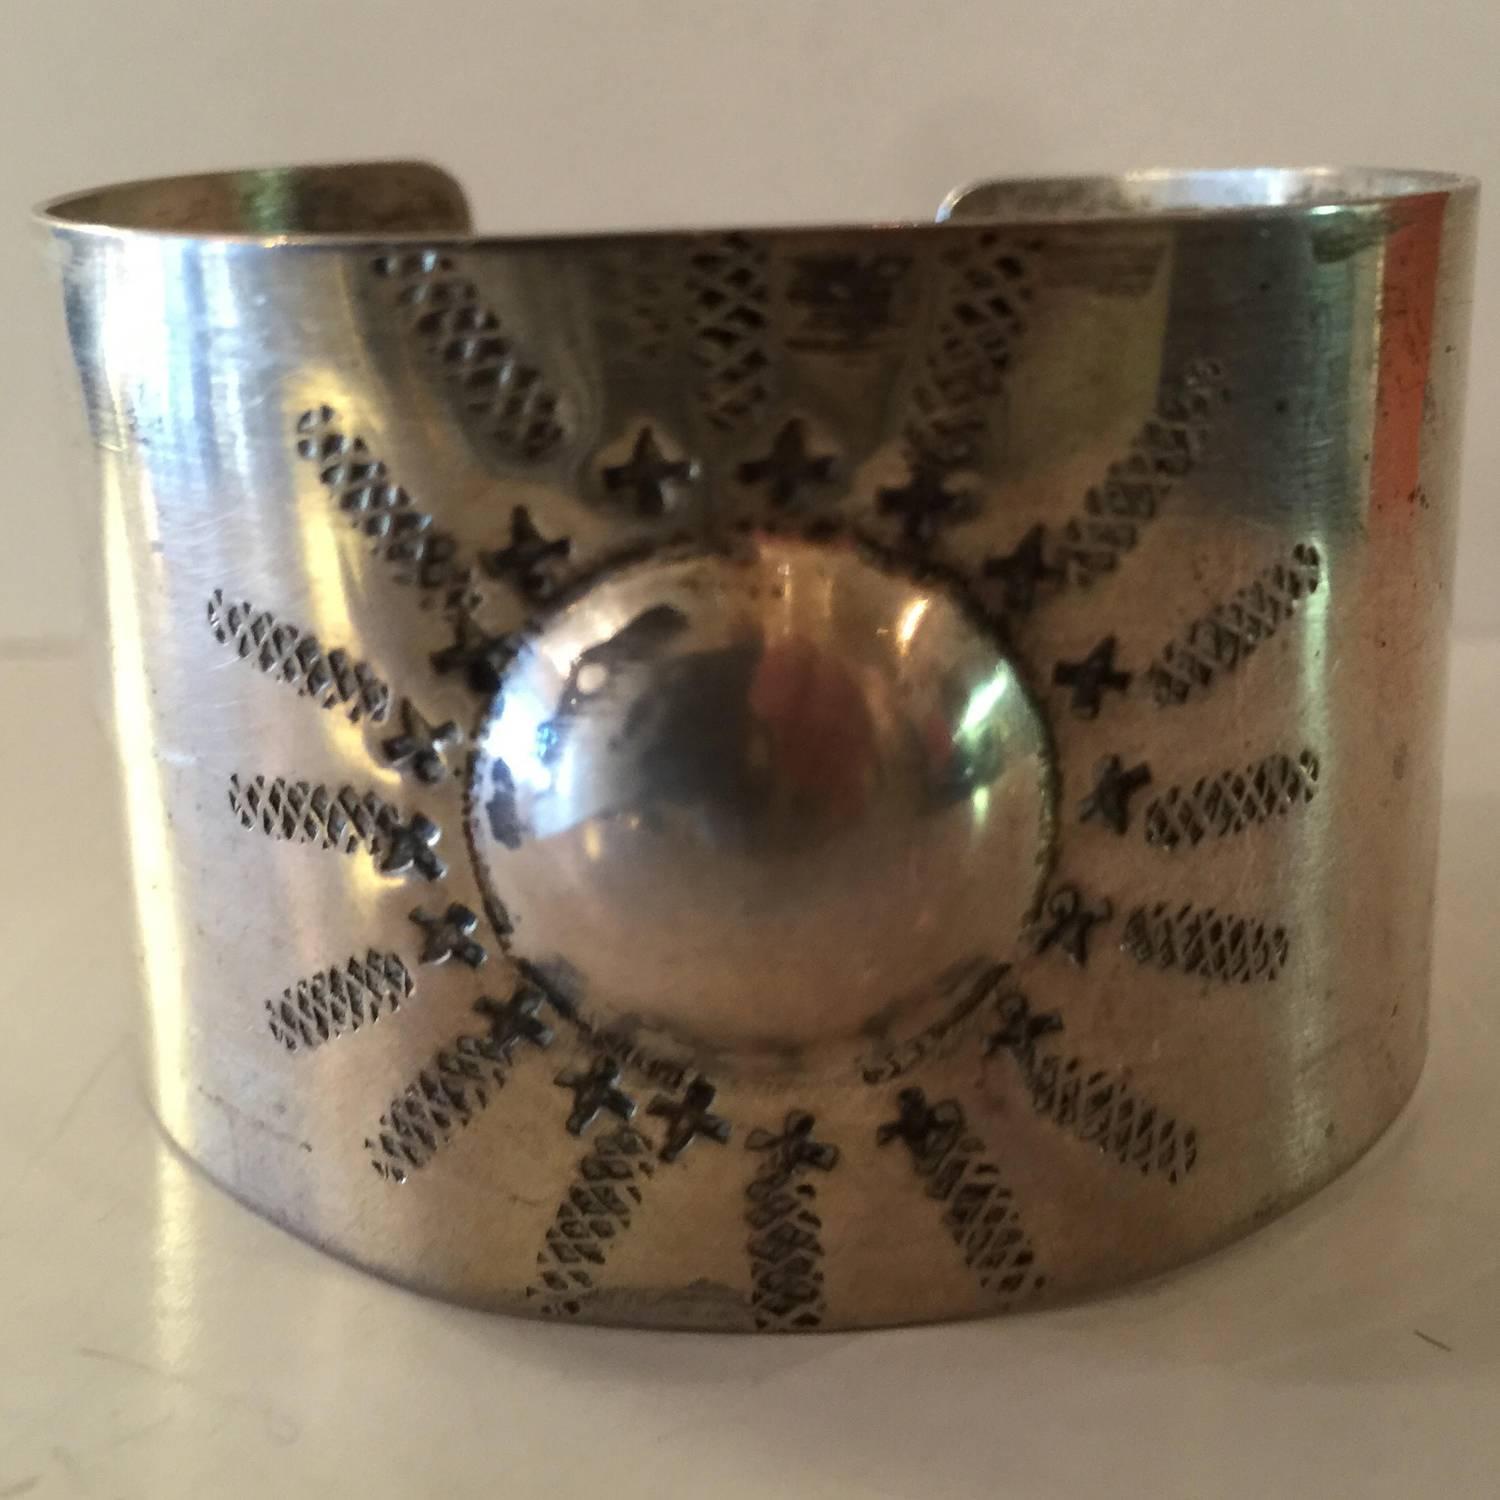 This stylized sunburst embossed sterling silver cuff bracelet is an unusual work by Modernist master Rebajes. based in NY in the post war years, he was known for making handmade jewelry mostly in copper, but also did work in steling silver. Known